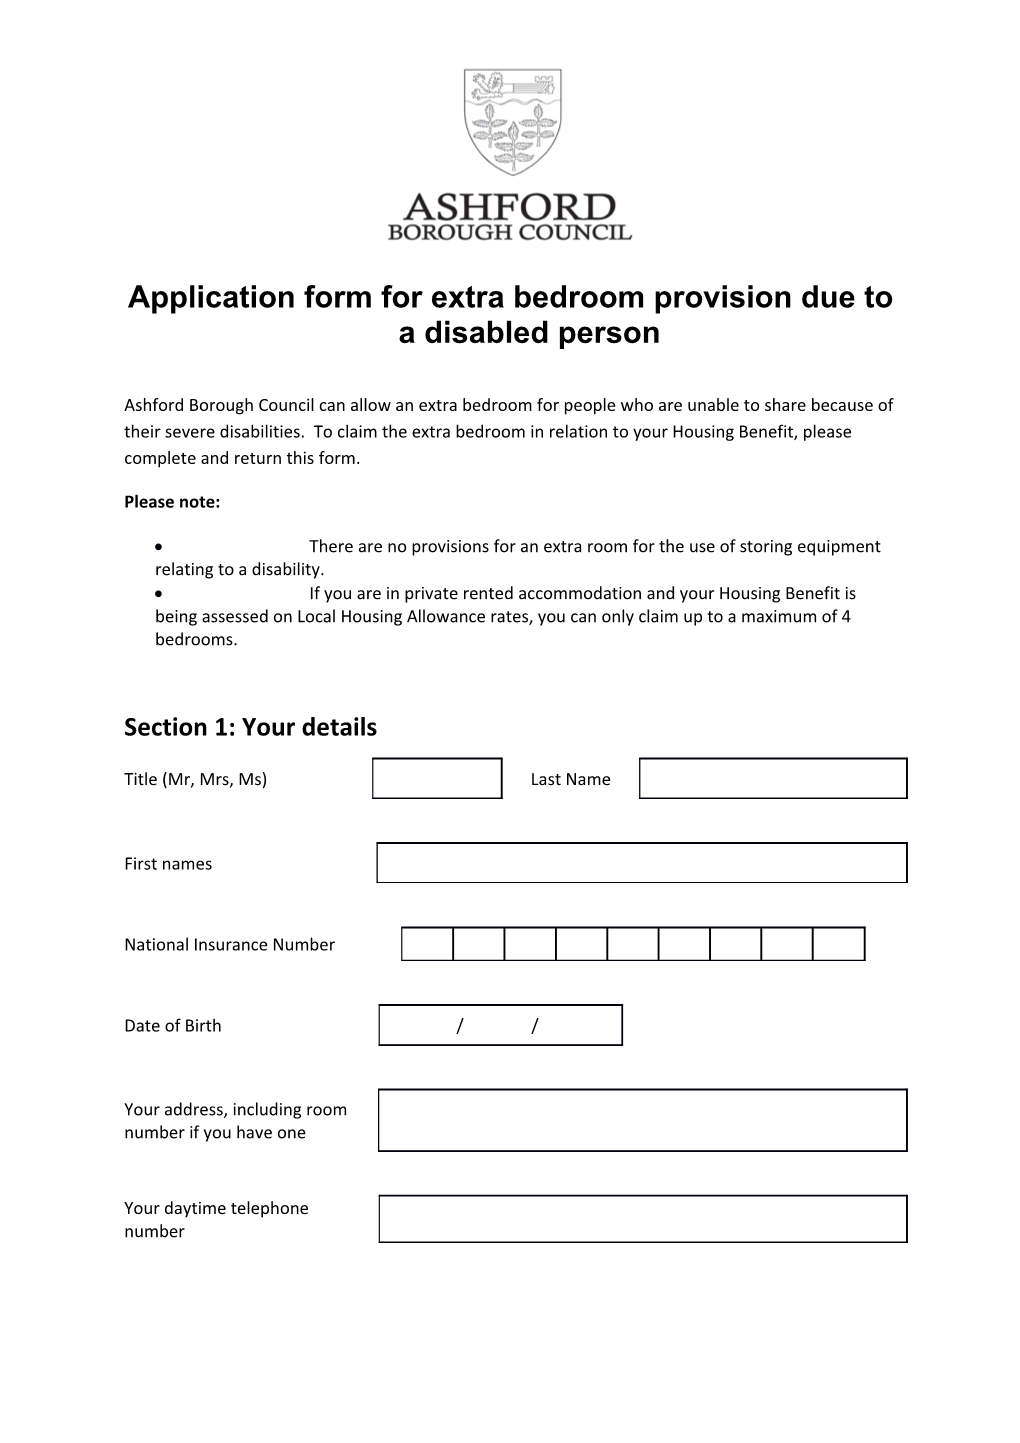 Application Form for Extra Bedroom Provision Due to a Disabled Person